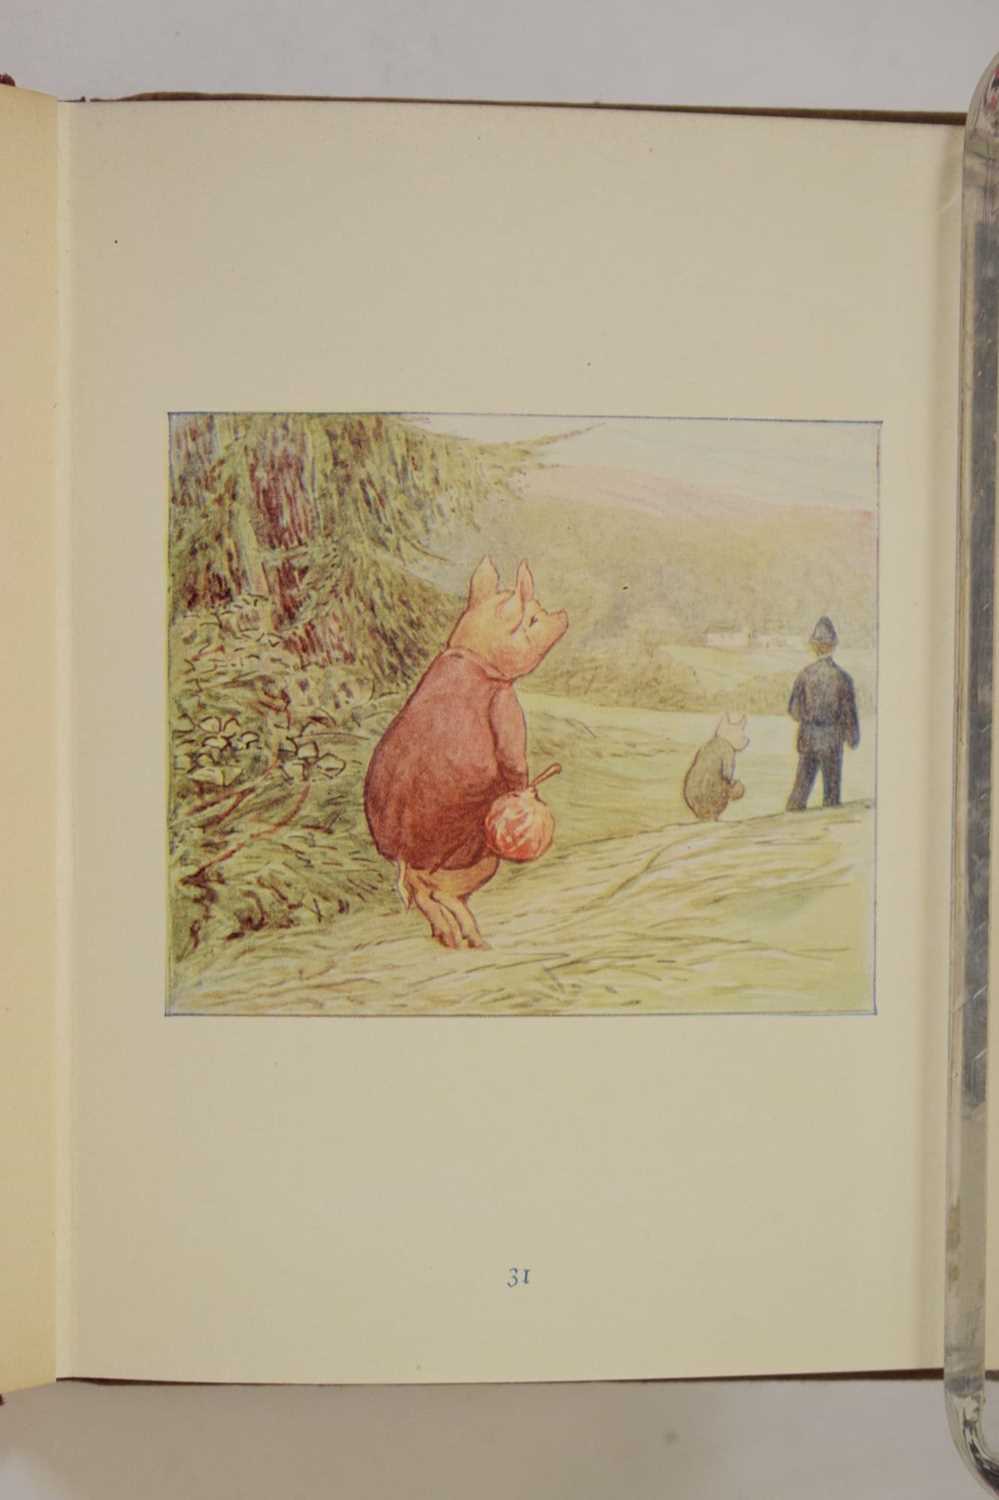 Potter, Beatrix - 'The Tale of Pigling Bland' - First edition 1913 - Image 17 of 19